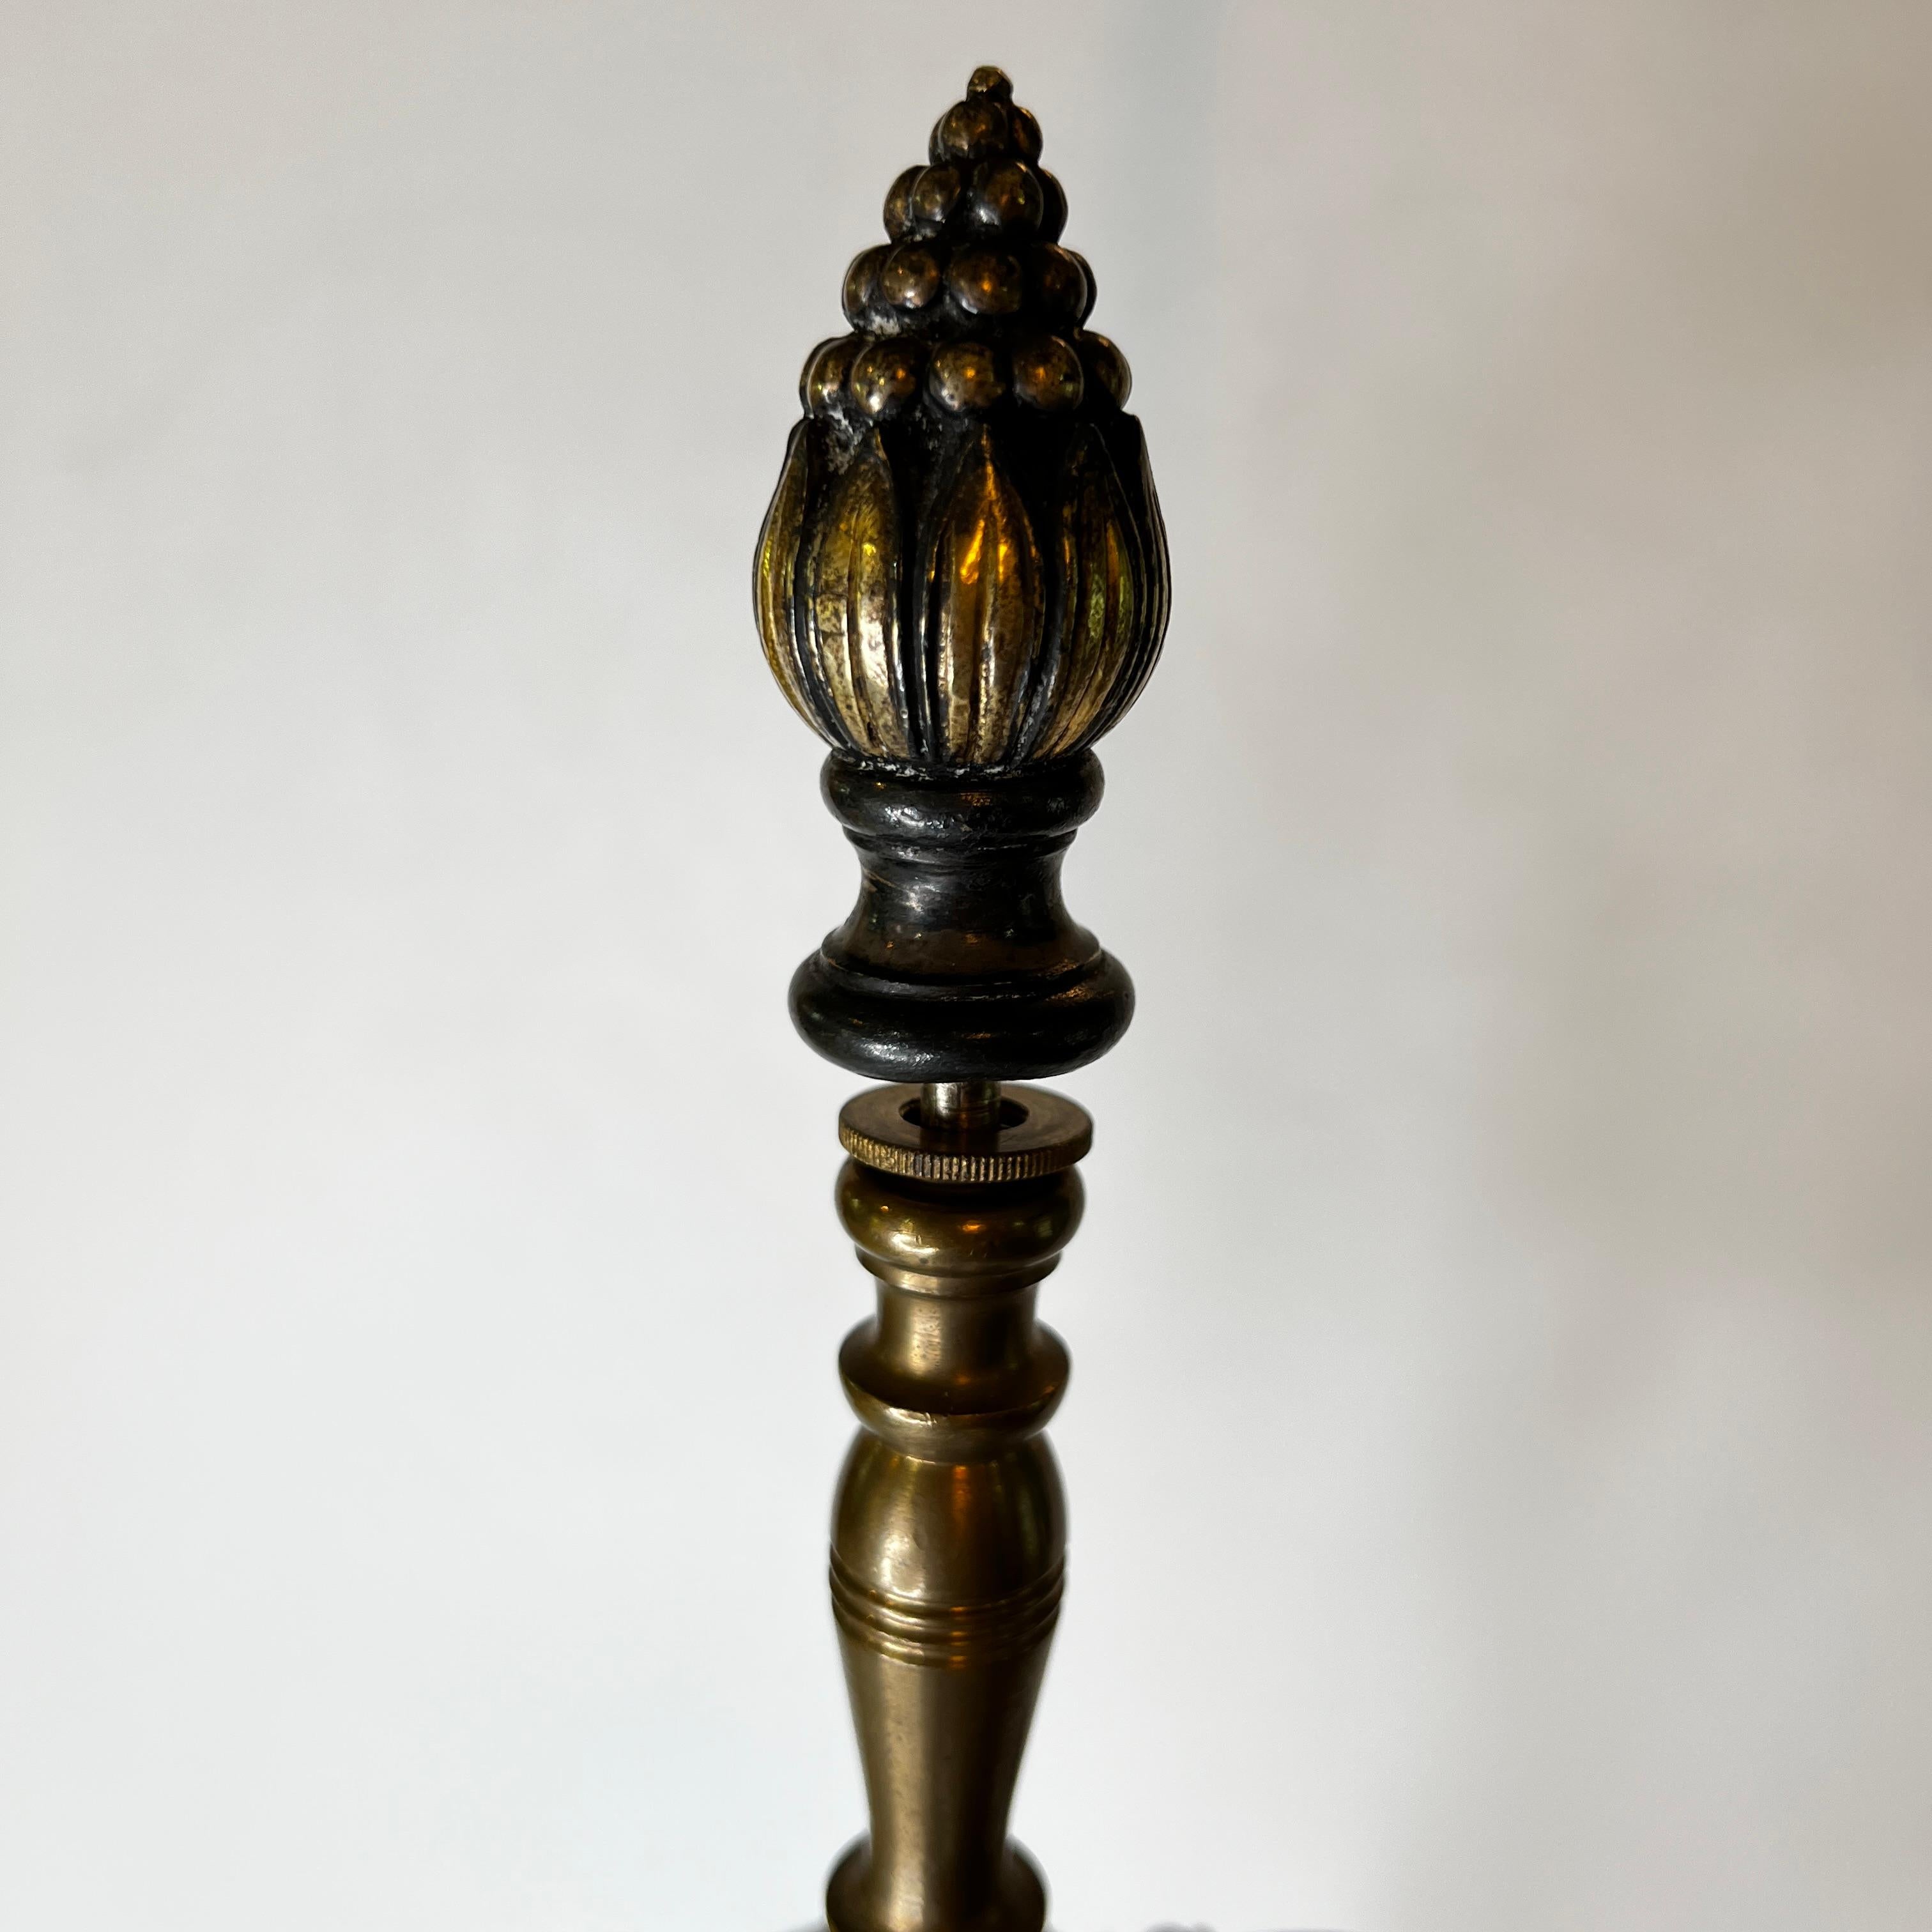 Our silver colored metal table lamp with gilded designs in the renaissance style comes from Edward F. Caldwell, circa 1910. 

It has its original acorn finial and features raised neoclassical motifs including scrolling foliage, acanthus leaves,